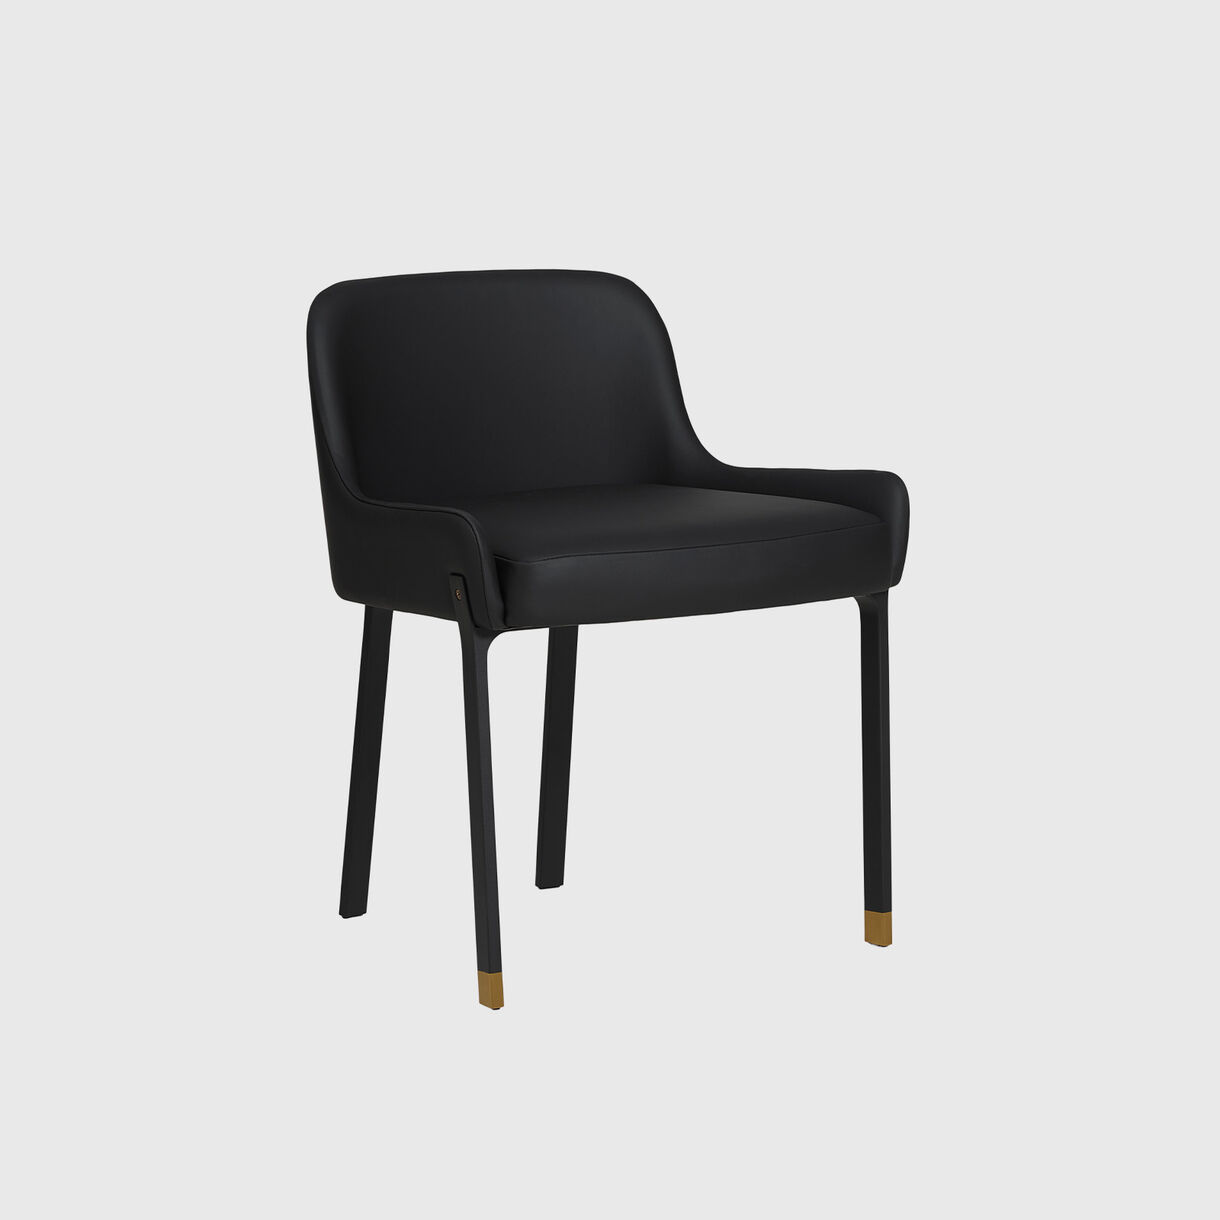 Blink Dining Chair, Bellagio Leather - Black